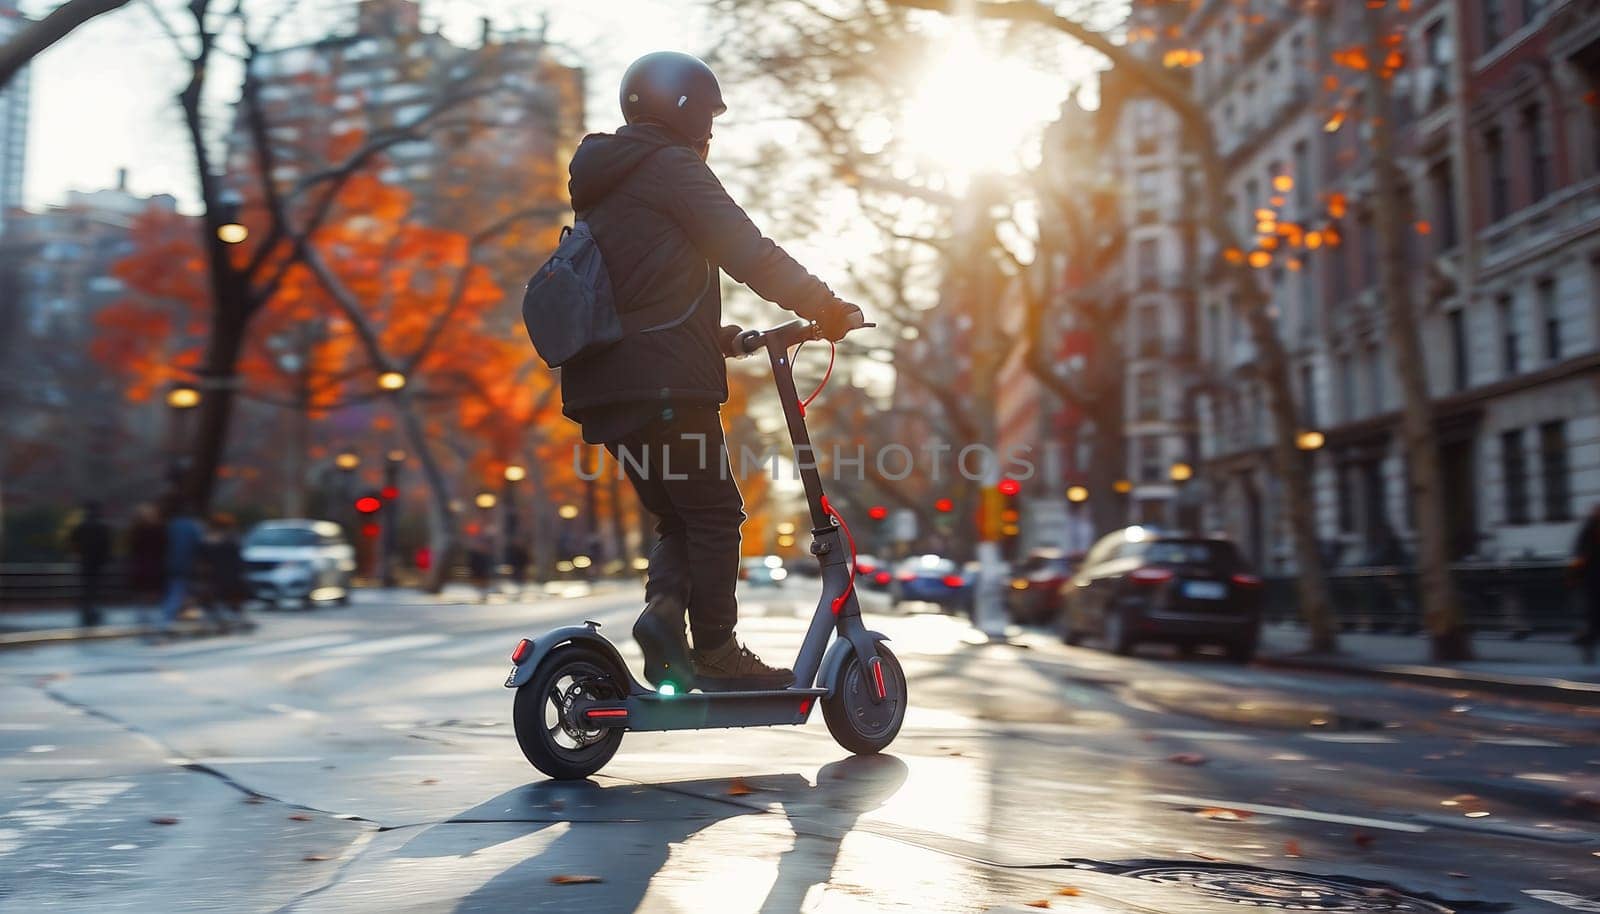 A person is riding a scooter down a city street by AI generated image.